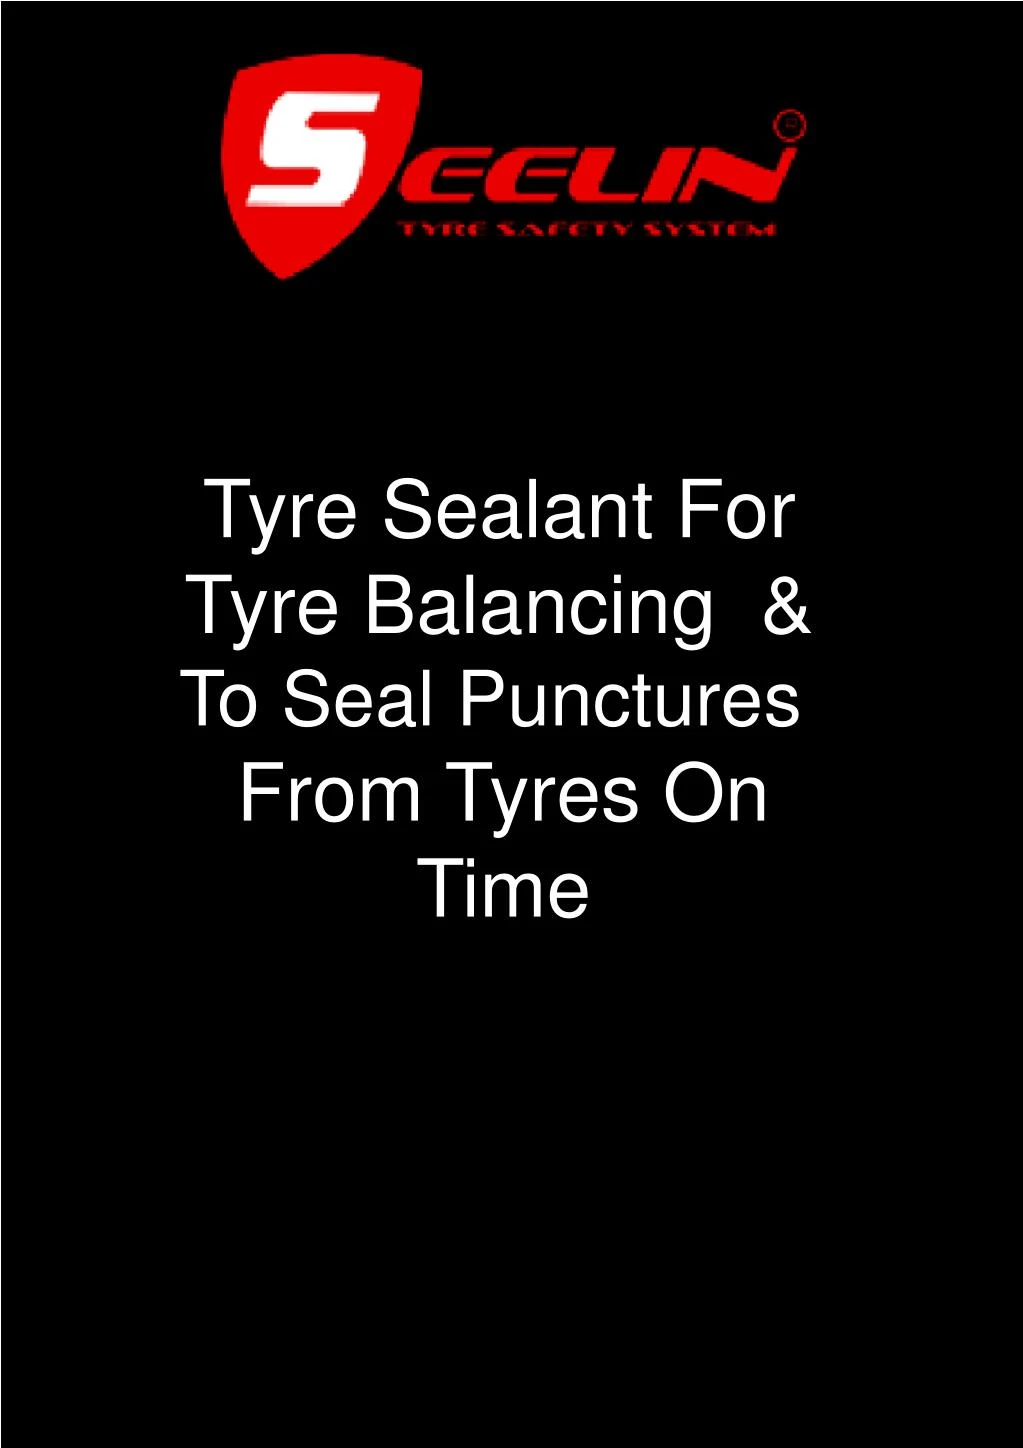 tyre sealant for tyre balancing to seal punctures